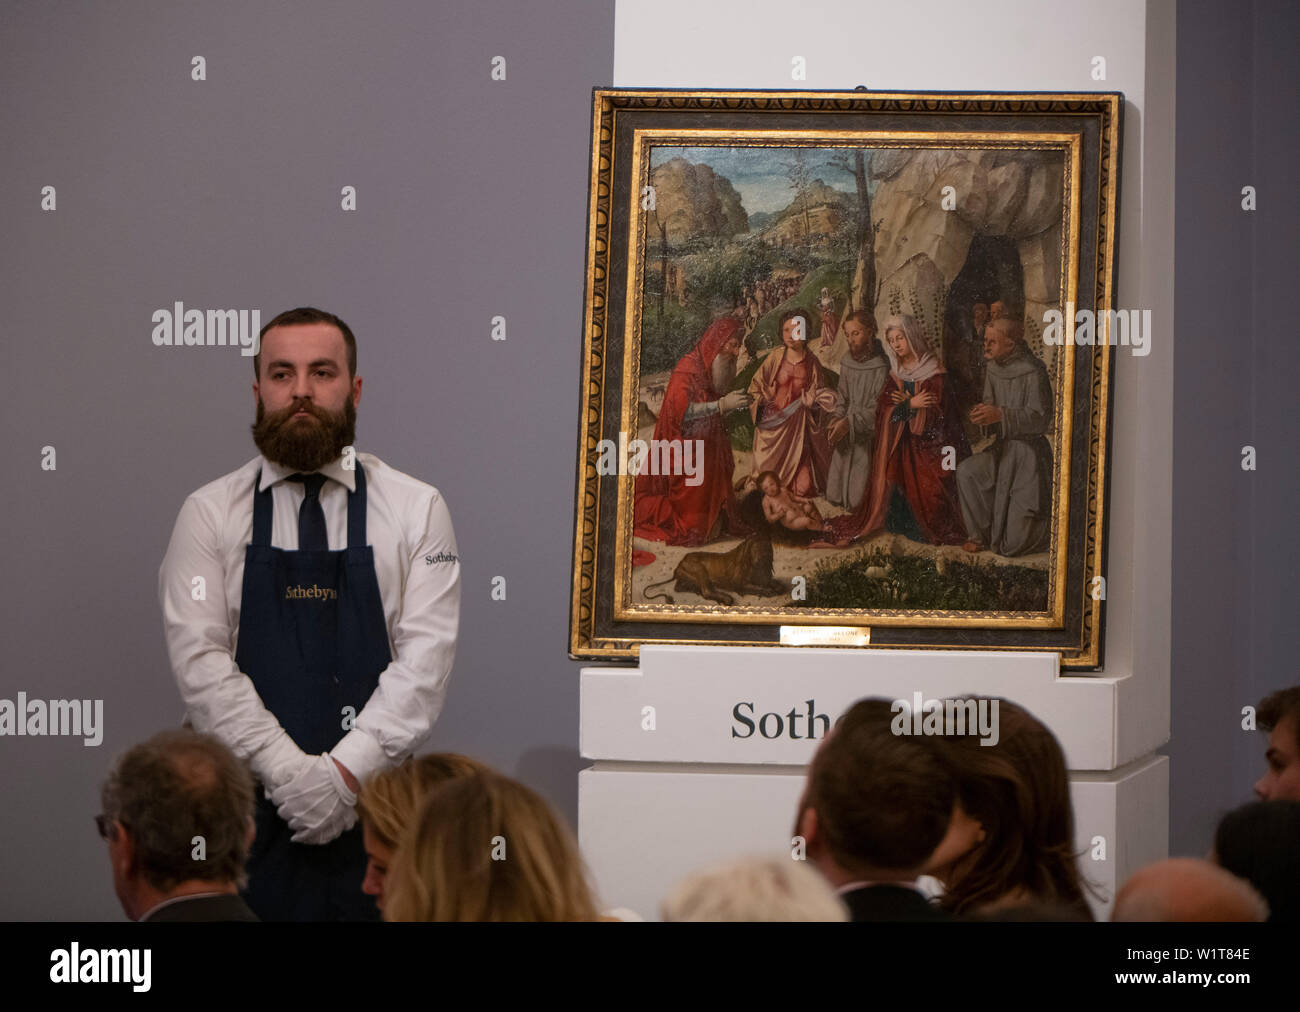 Sotheby’s, London, UK. 3rd July 2019. The summer Old Masters Evening sale offers paintings from the 14th - 19th century by many of the most important painters of Western art. Highlights include a masterpiece by each of Britain’s greatest landscape painters - Turner, Constable and Gainsborough - and extraordinary works from the Baroque by Ribera and the exceptionally rare Johann Liss. Image: Altobello Melone, The Adoration with Saints Francis of Assisi, Catherine of Alexandria, Jerome and Bernardino of Siena, the Shepherds and Magi, sells for £200,000. Credit: Malcolm Park/Alamy Live News. Stock Photo